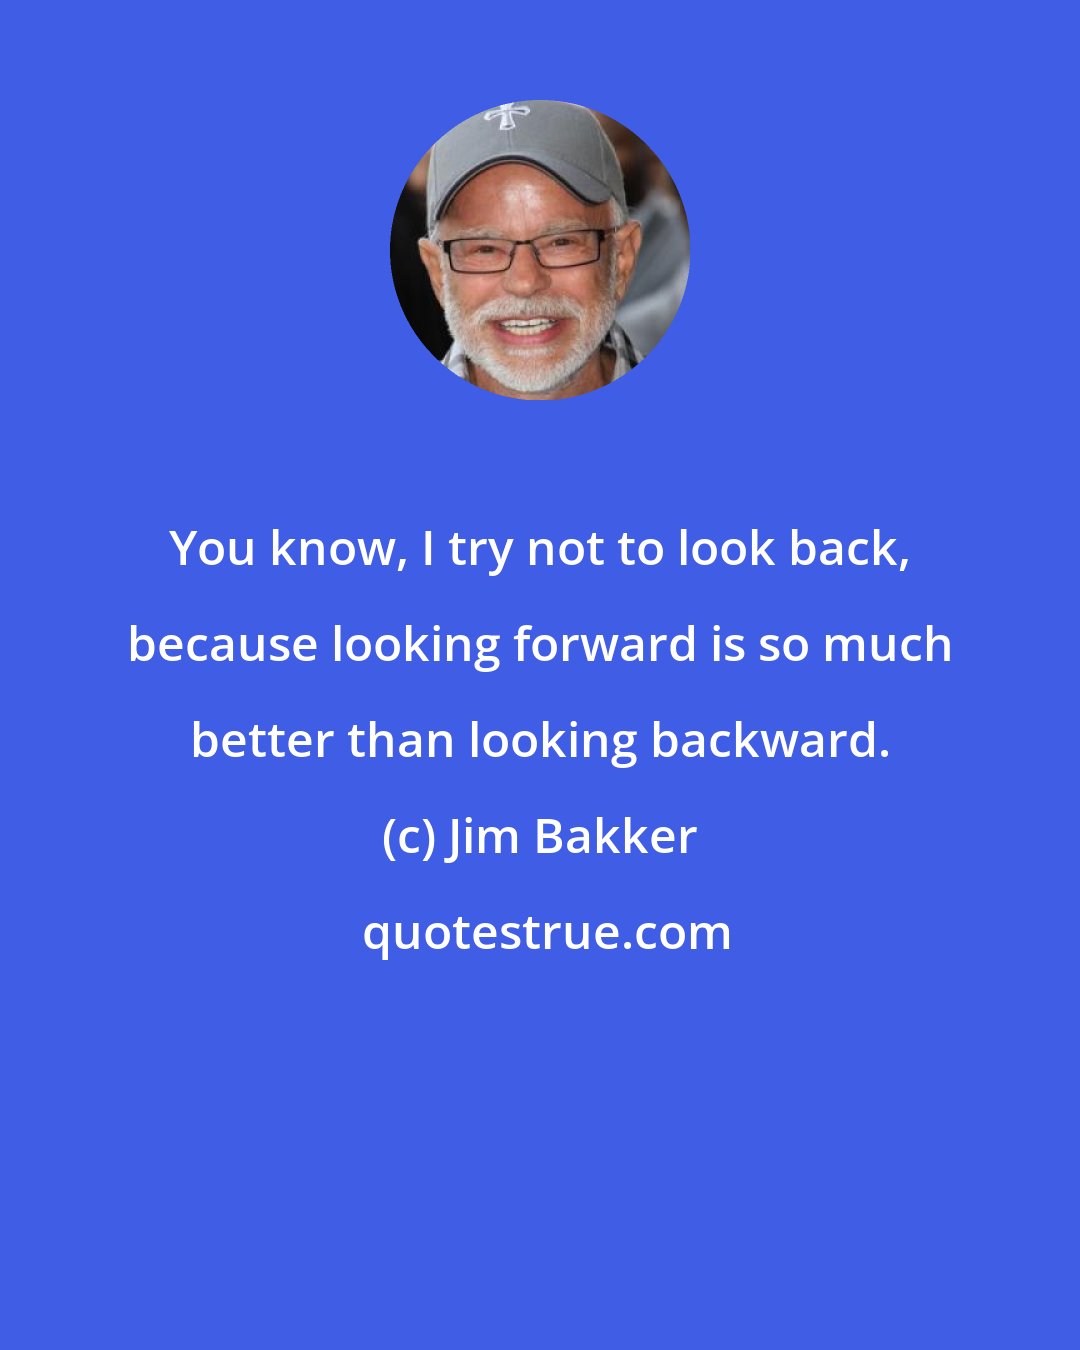 Jim Bakker: You know, I try not to look back, because looking forward is so much better than looking backward.